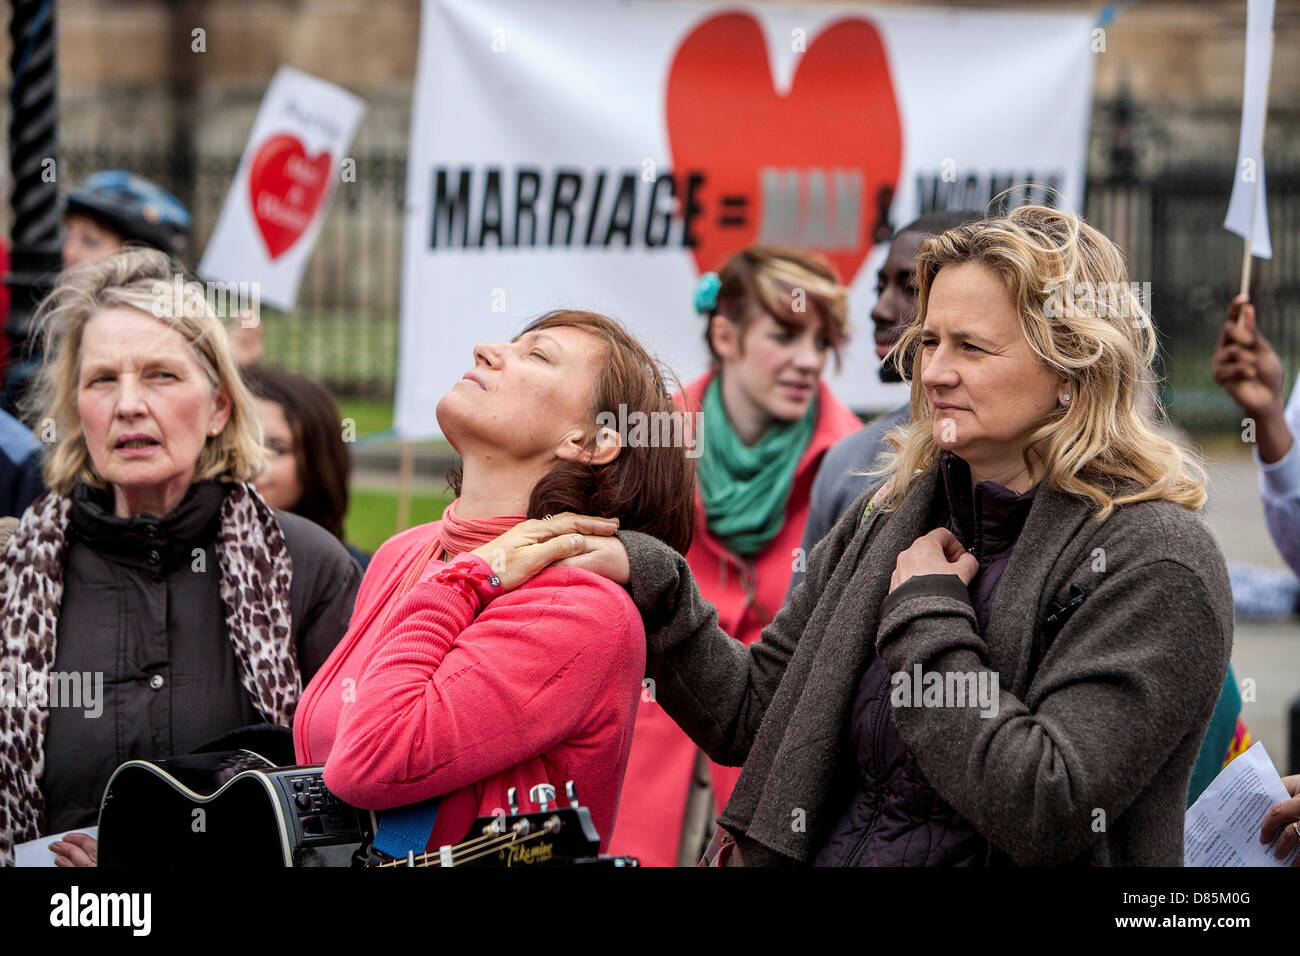 London, UK. 20th May, 2013. Christians demonstrate and pray against the same sex marriage bill being voted on in Parliament.   Credit:  Mario Mitsis / Alamy Live News Stock Photo